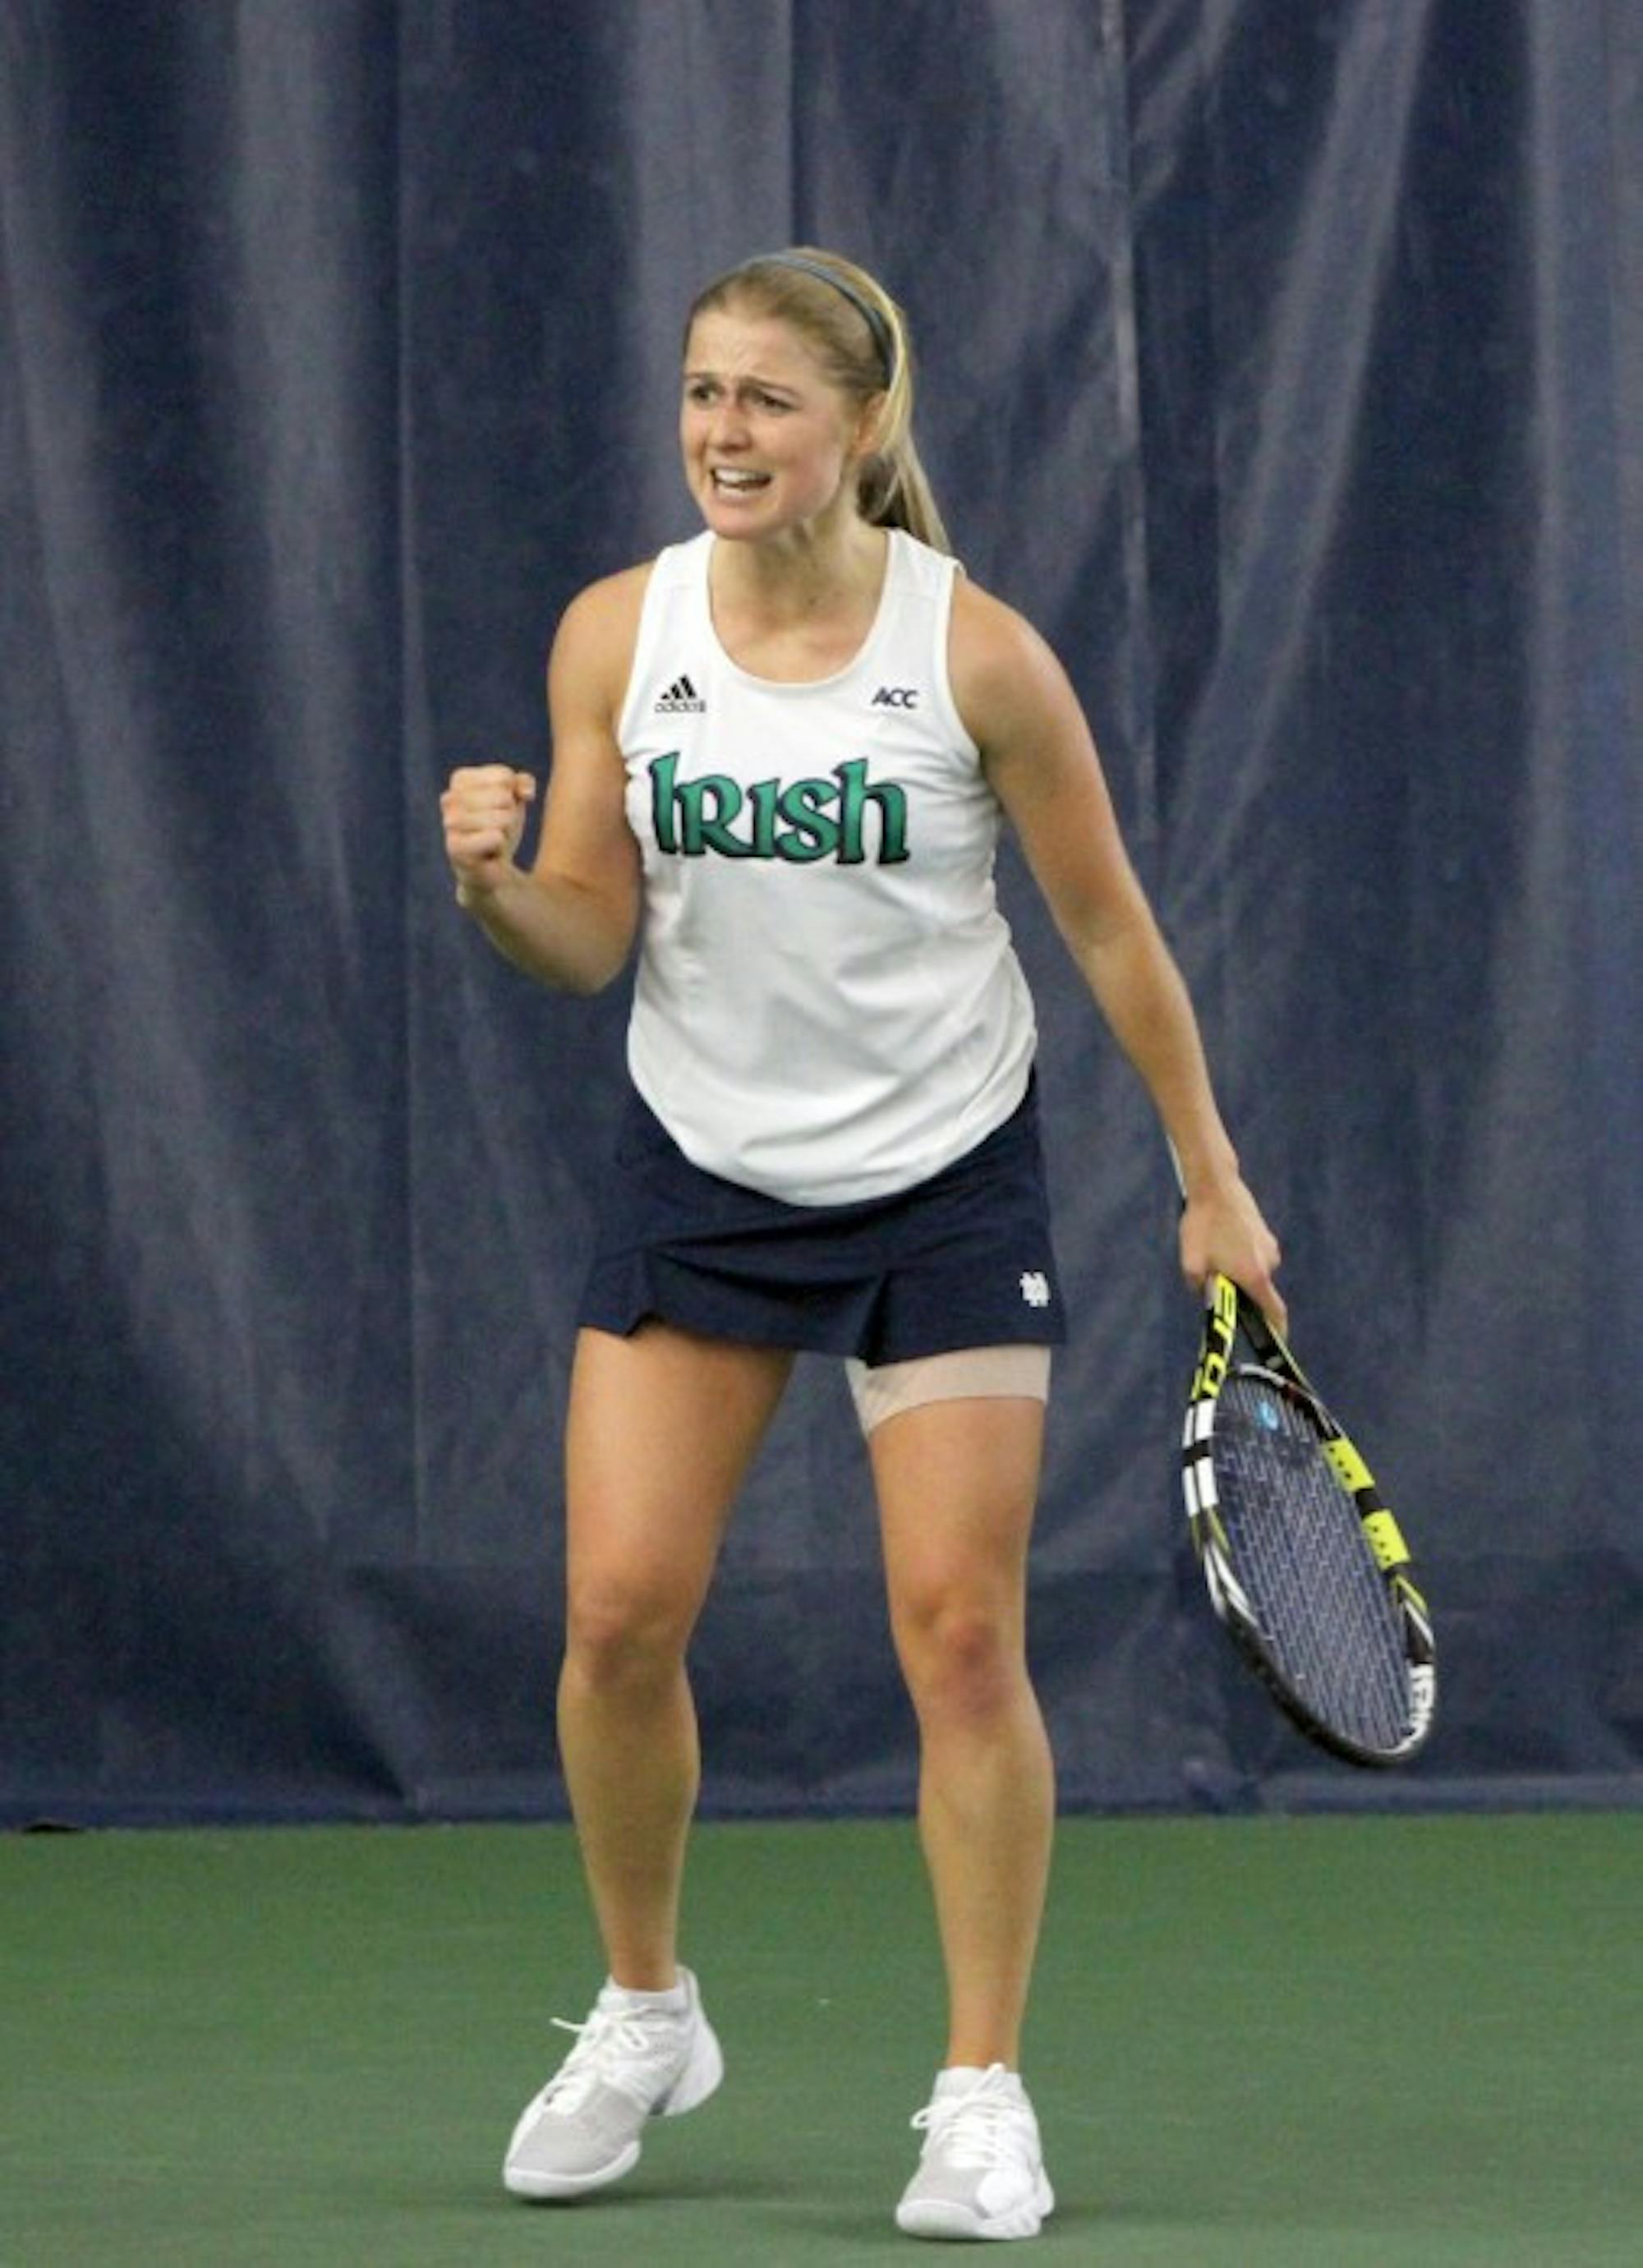 Irish sophomore Monica Robinson reacts after a shot during Notre Dame’s 4-3 win over Indiana on Feb. 2 at Eck Tennis Center.